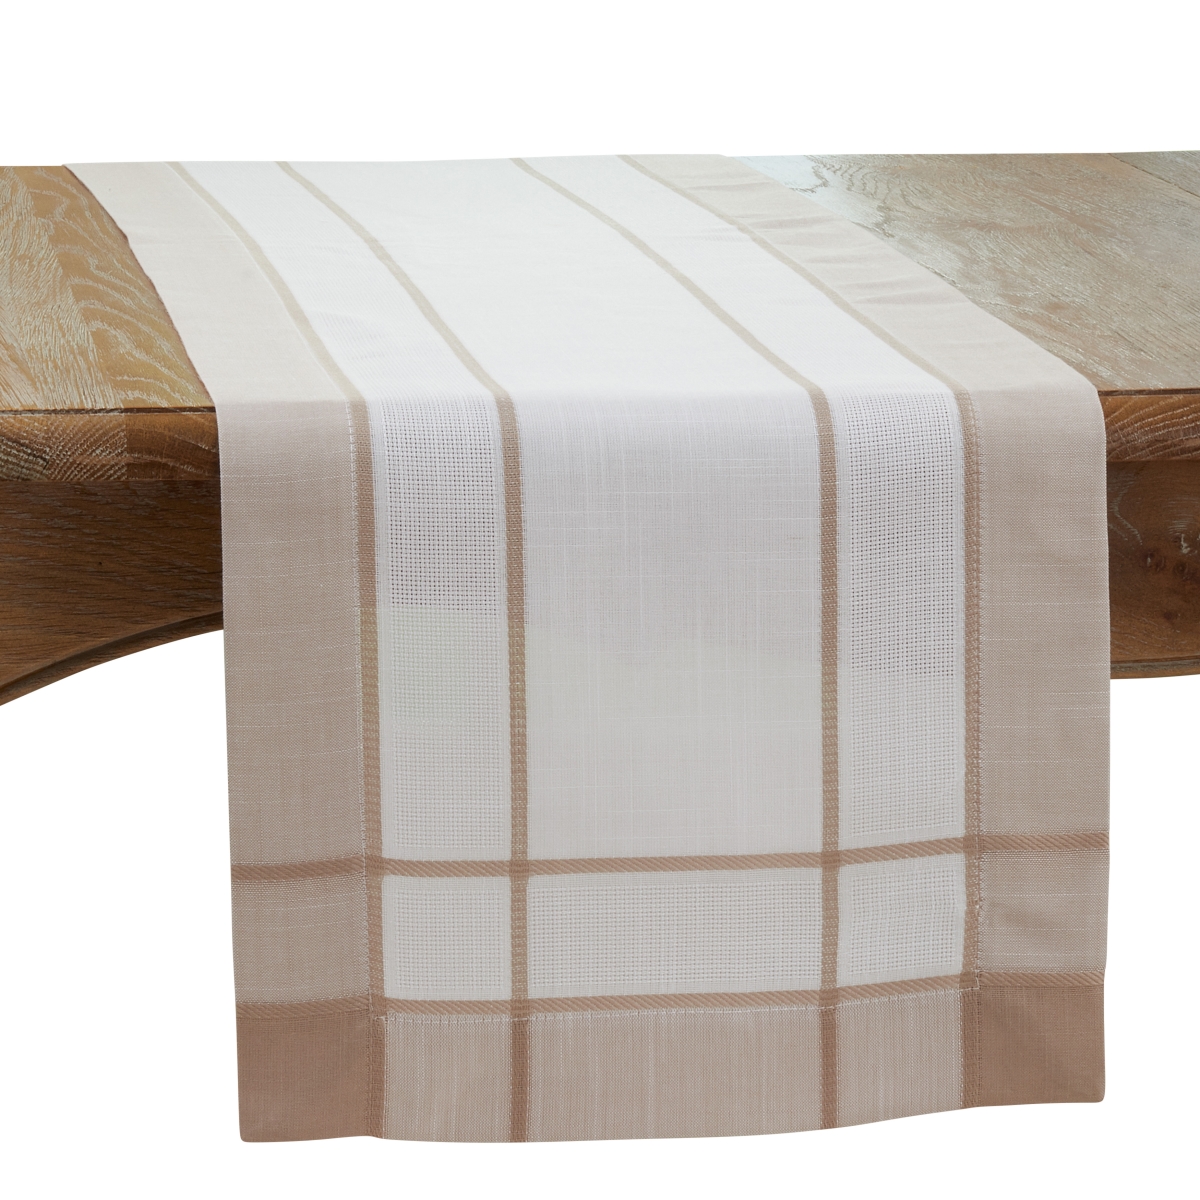 Picture of Saro 351.N16108B 16 x 108 in. Banded Border Oblong Table Runner, Natural